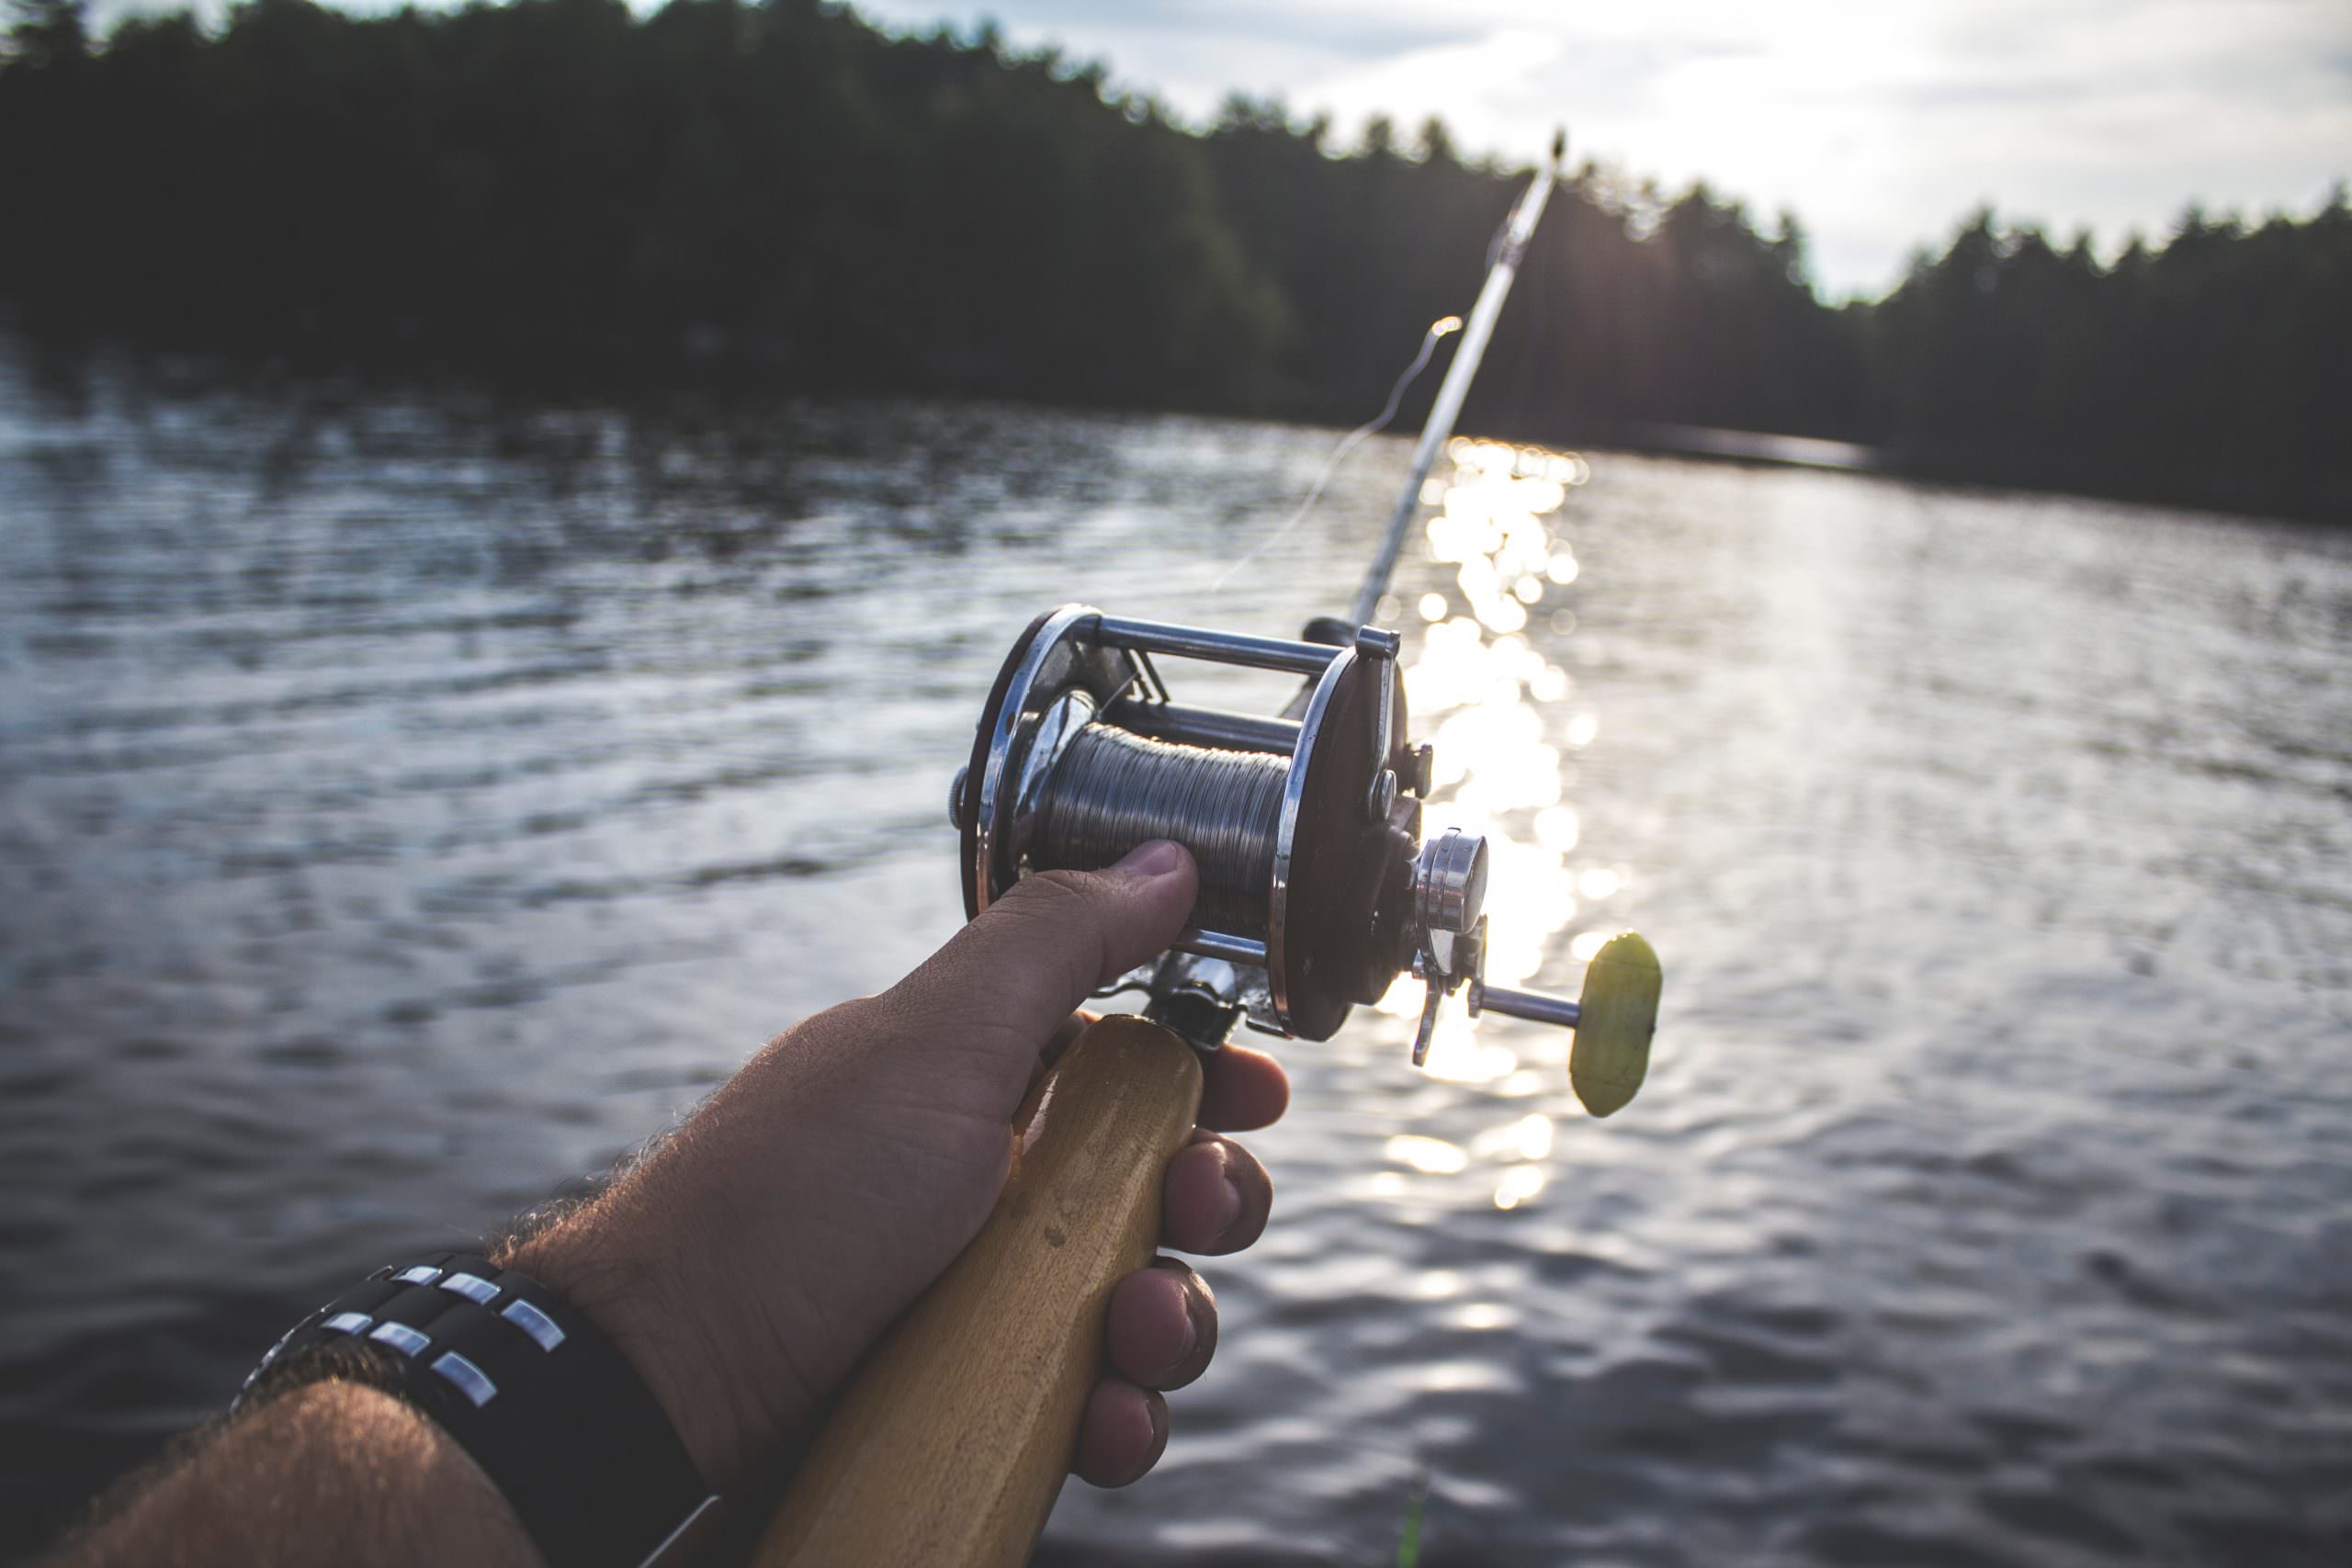 Enter the World of Fishing 101